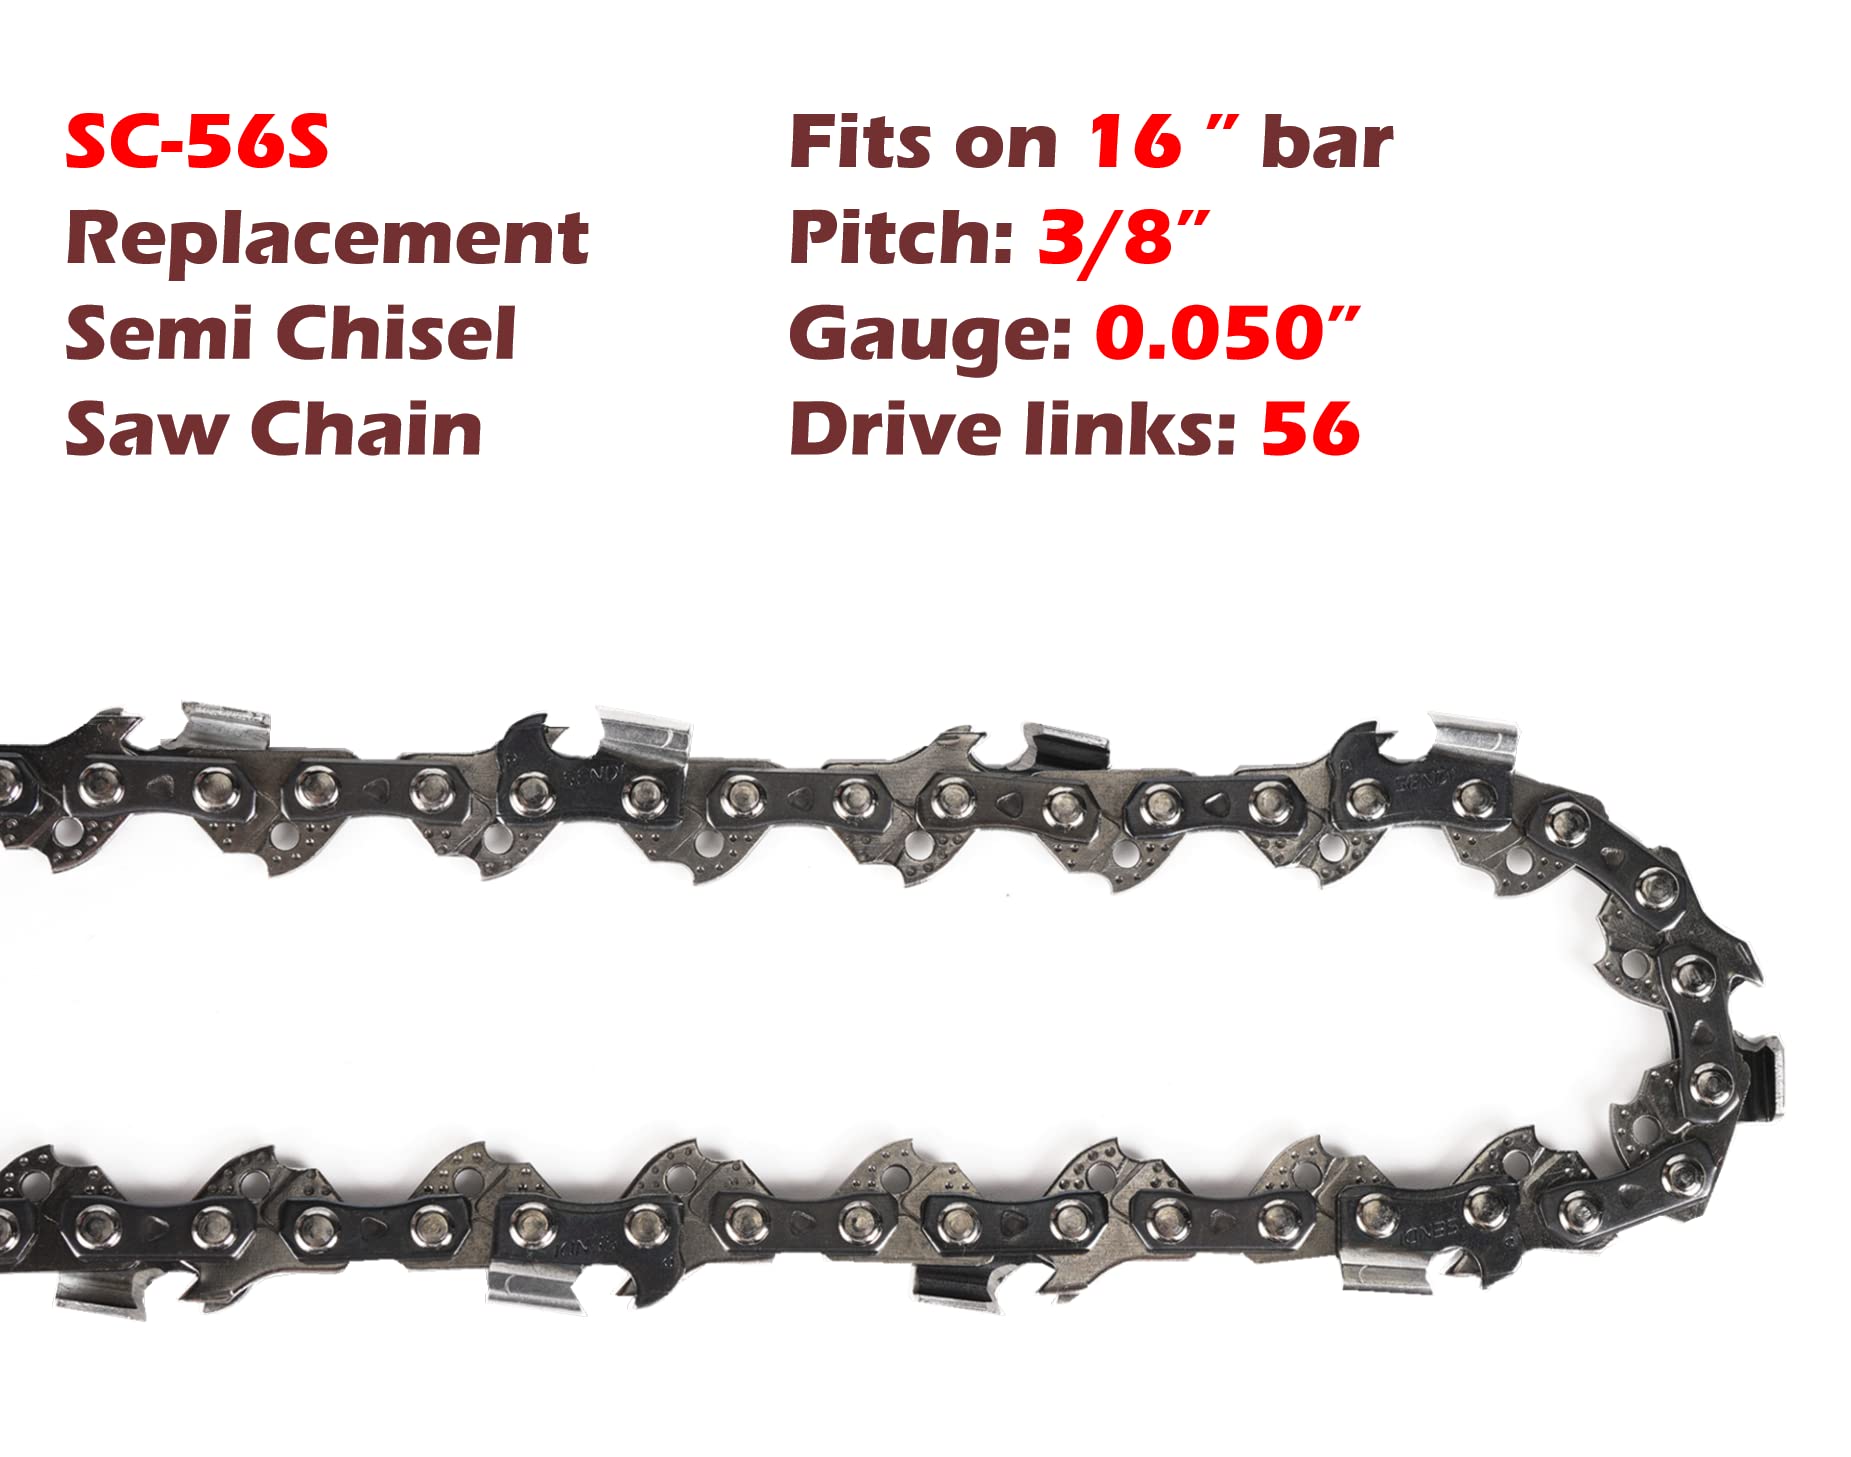 2PCS/PACK Reliable Replacement SC-S56 16-Inch Semi Chisel Saw Chain, Pitch: 3/8", gauge: .050", drive link count: 56, Compatible for Echo, Homelite, Poulan, Remington, Greenworks and more